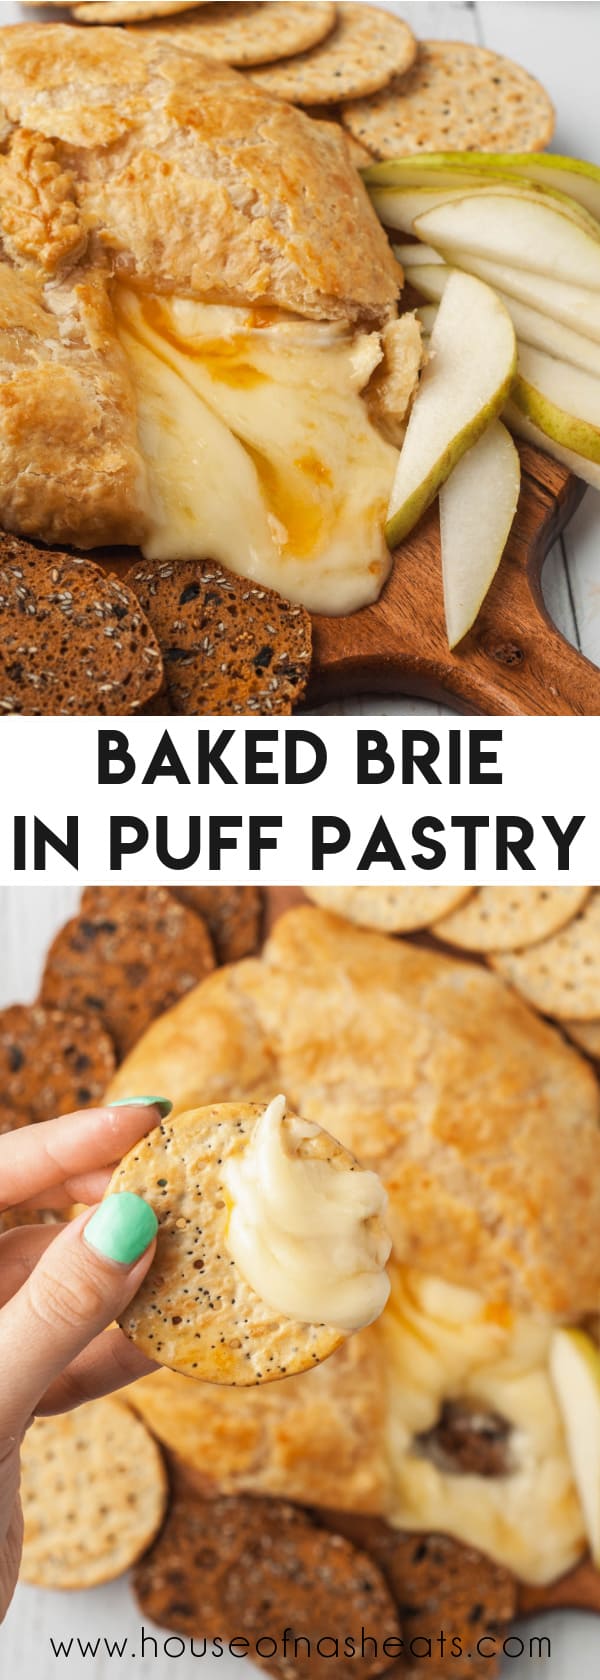 A collage of images of baked brie in puff pastry with text overlay.